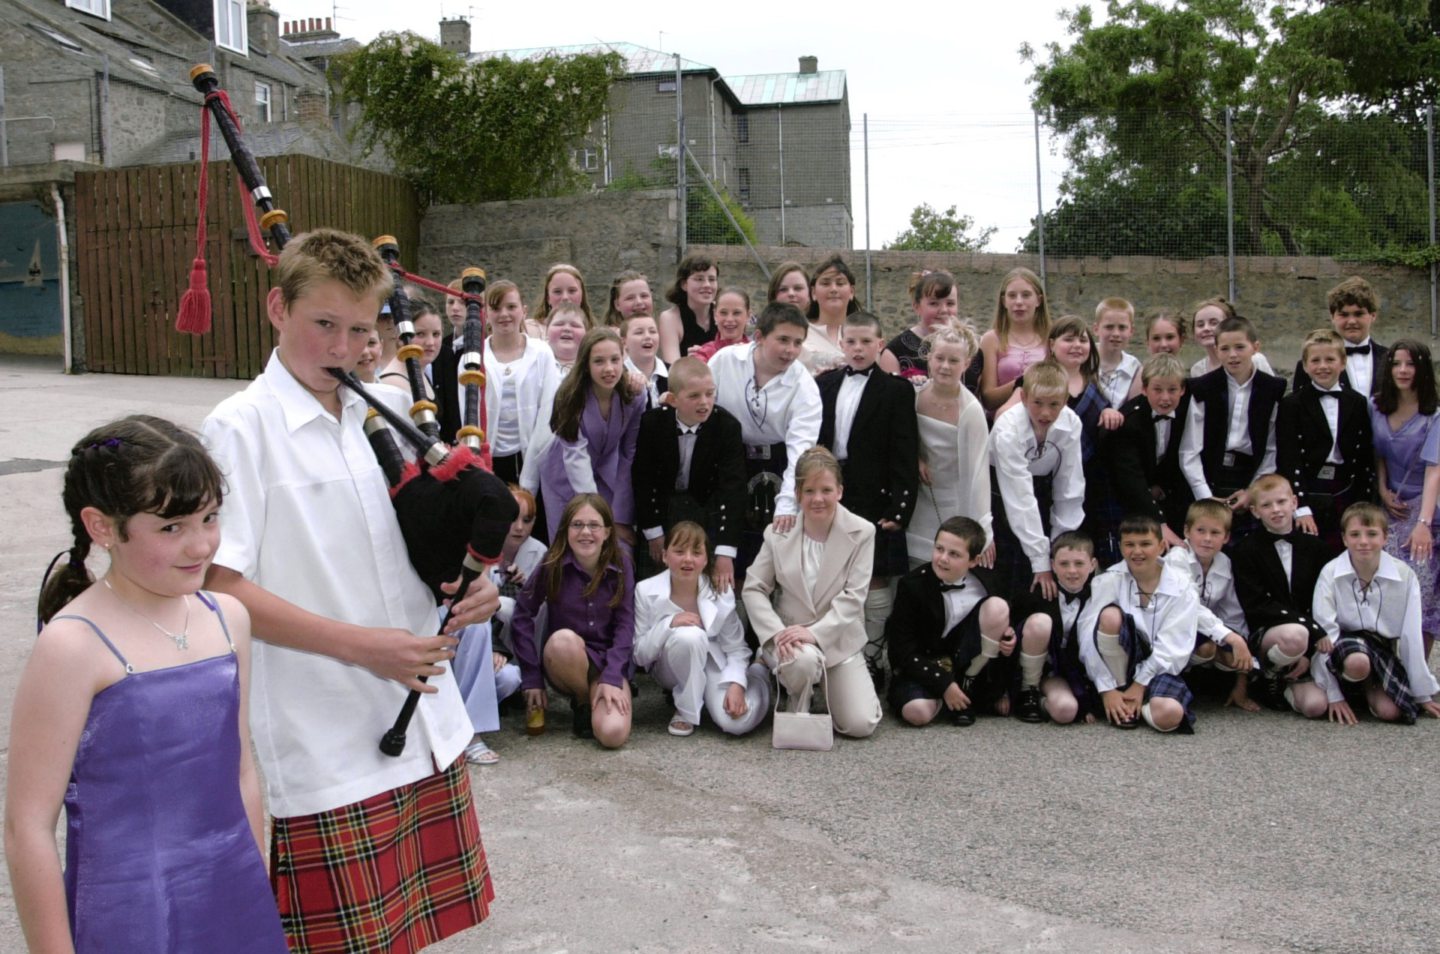 Pupils suited and booted for a dance at the school in 2003.